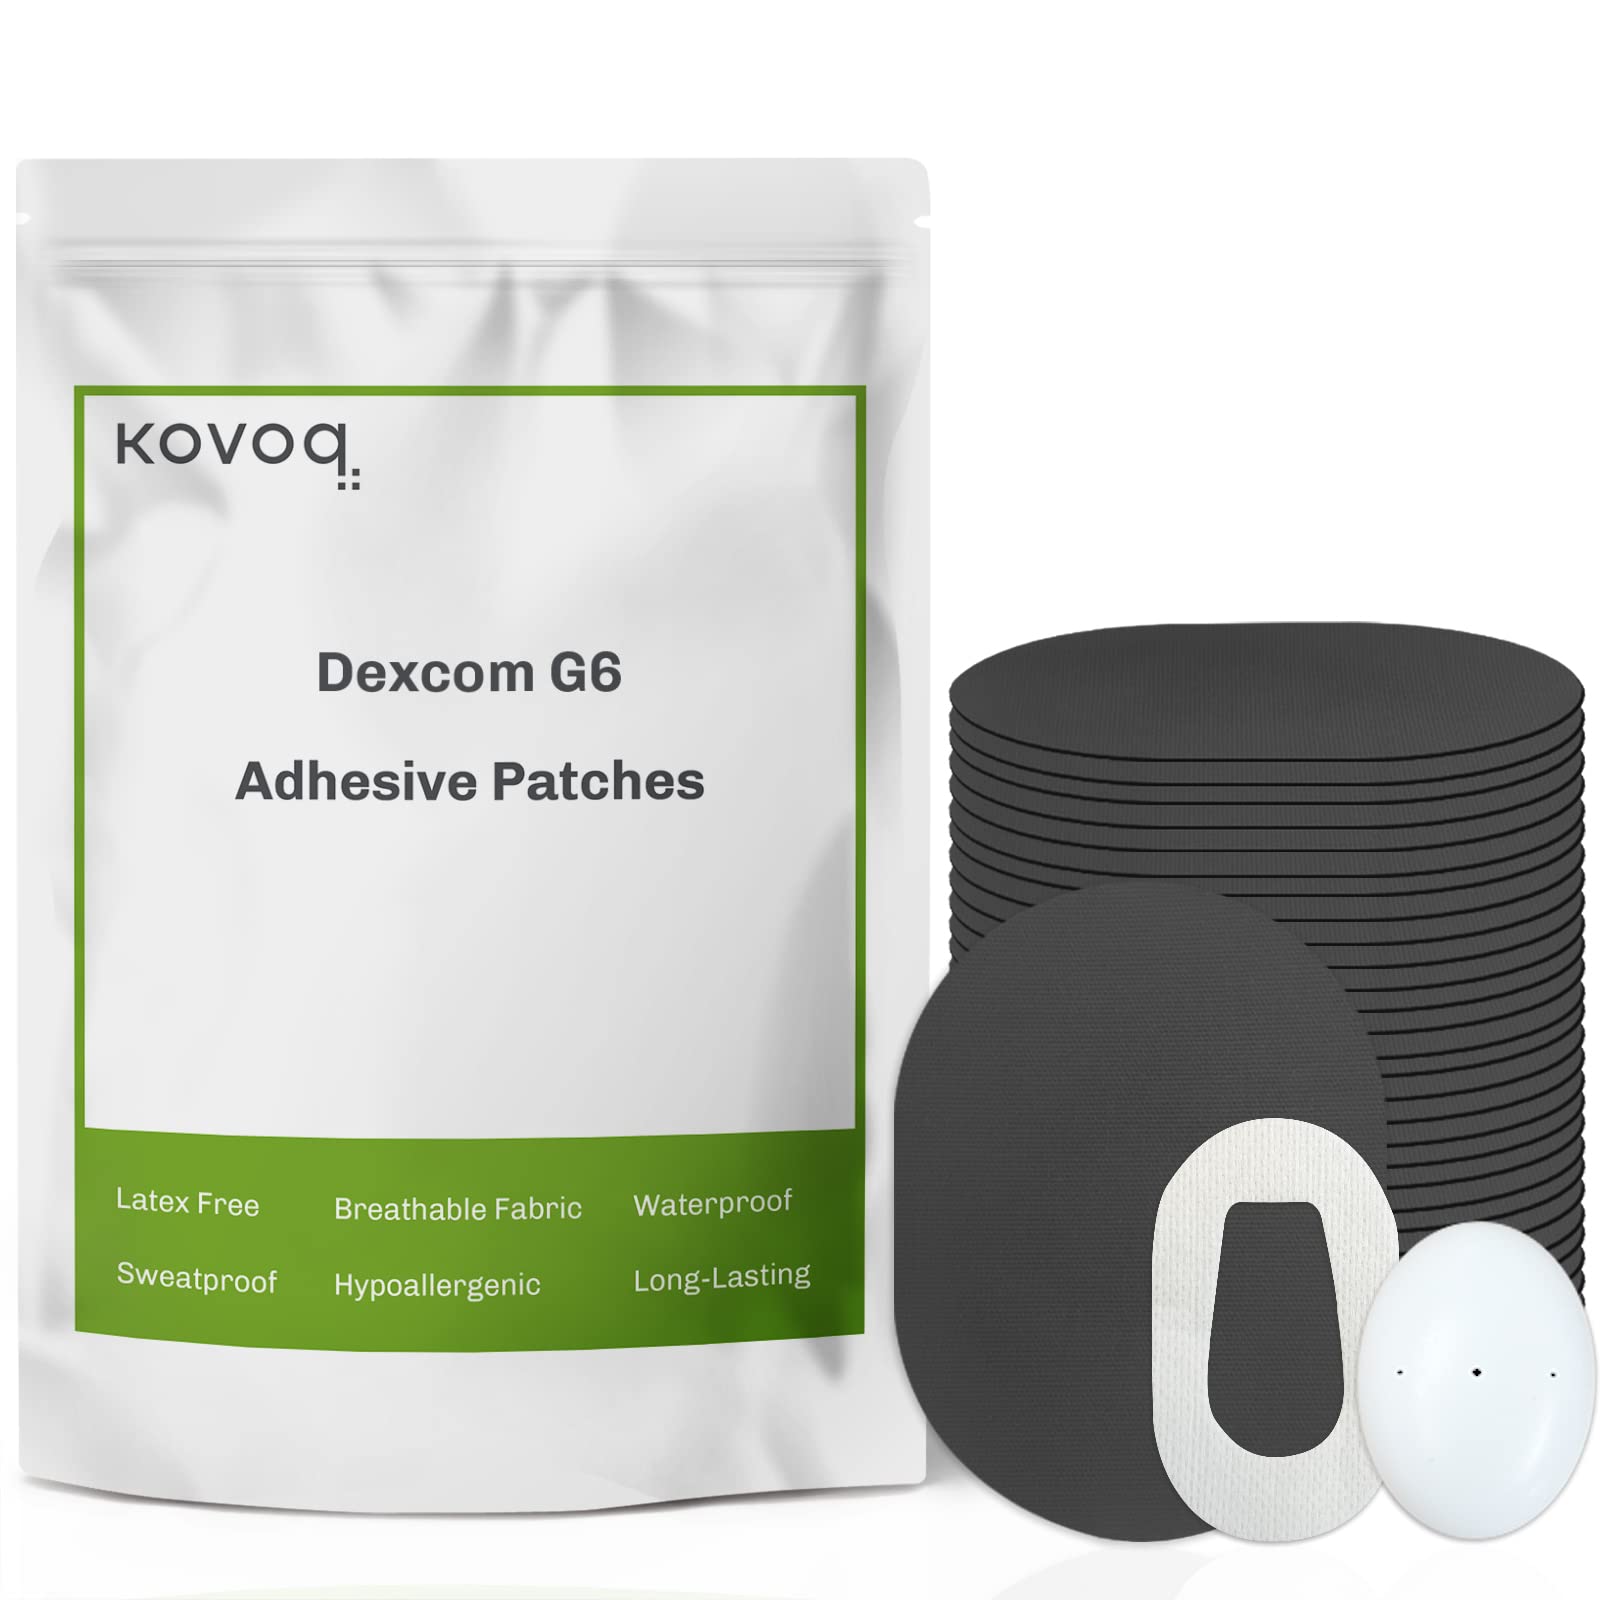 Kovoq Dexcom G6 Adhesive Patches 25 Waterproof Adhesive Patches + 1  Reusable Hardshell Cover No Glue